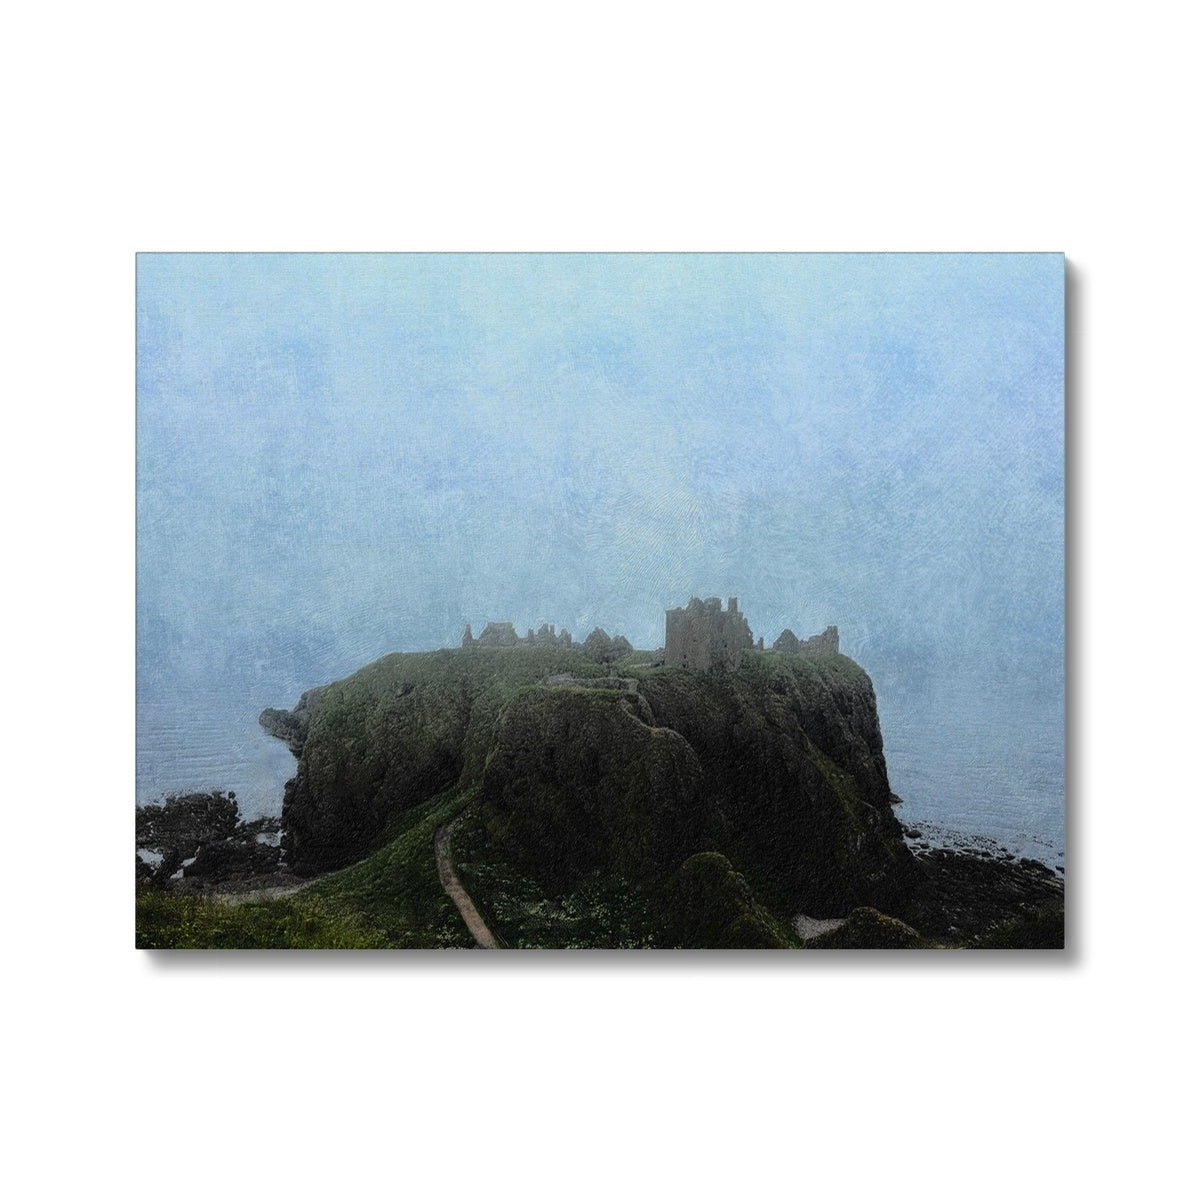 Dunnottar Castle Mist Painting | Canvas From Scotland-Contemporary Stretched Canvas Prints-Historic & Iconic Scotland Art Gallery-24"x18"-Paintings, Prints, Homeware, Art Gifts From Scotland By Scottish Artist Kevin Hunter